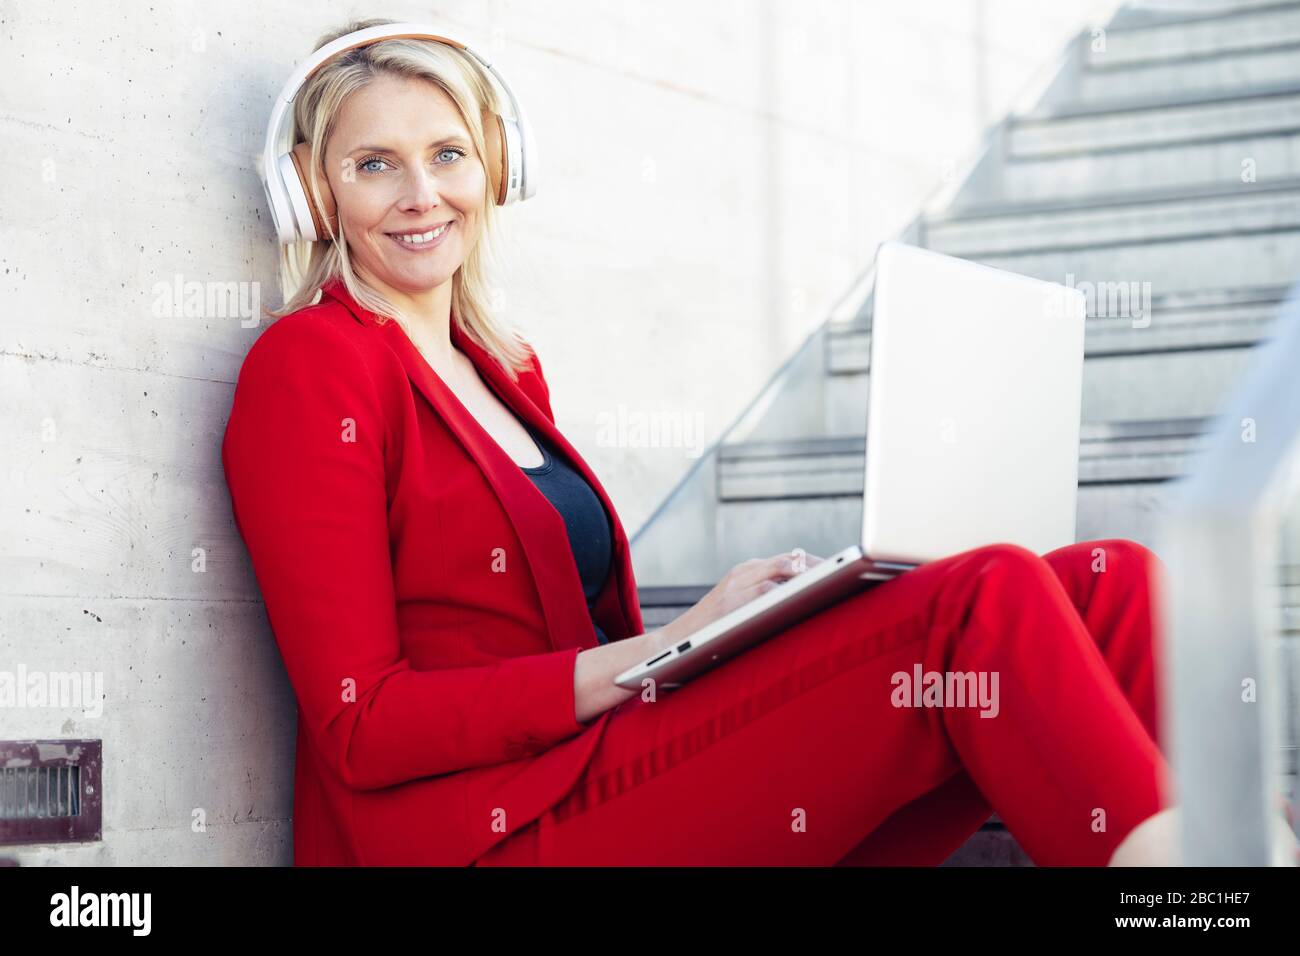 Blond businesswoman wearing red suit, sitting on stairs and using laptop Stock Photo